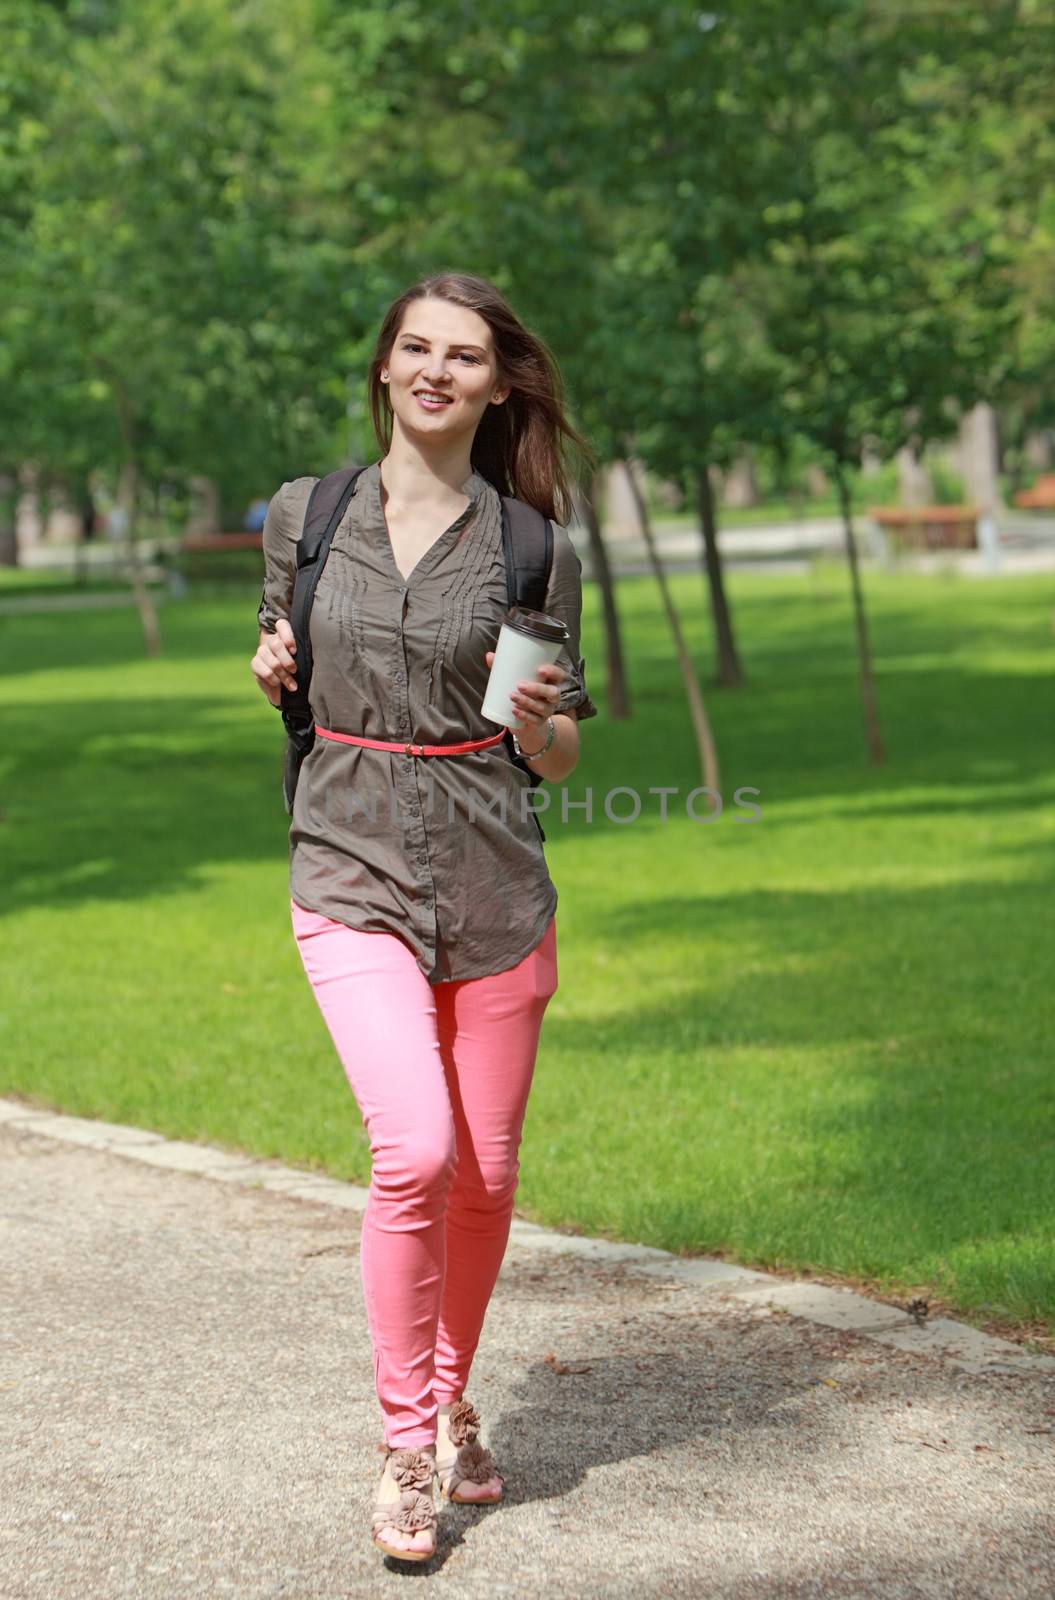 Young brown hair woman with a cup of coffee in her hand running outside in a park.